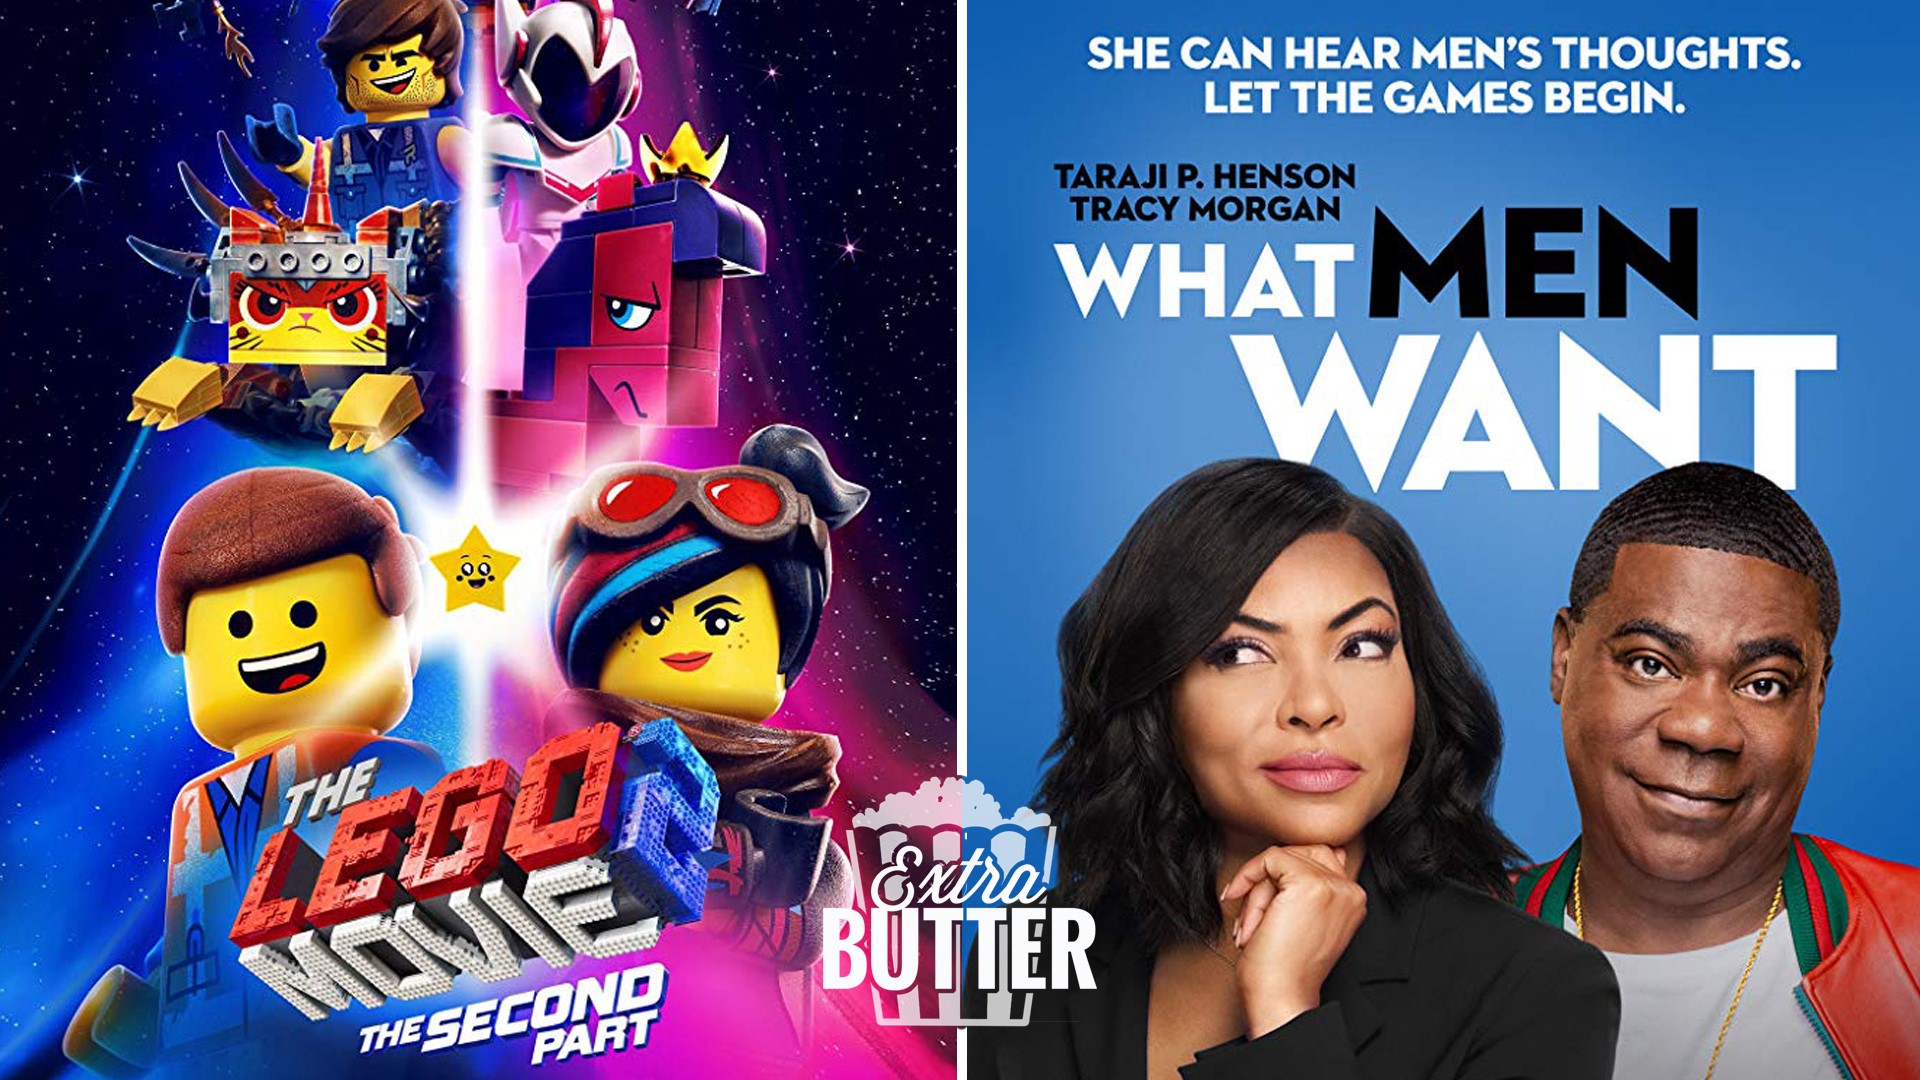 Hear from the stars of 'What Men Want' and 'The Lego Movie 2.' Mark S. Allen surprises Chris Pratt when he brings Chris' mom to the interview. Marks also talks with Elizabeth Banks, Tiffany Haddish, Will Arnett, Phil Lord & Chris Miller. Taraji P Henson, Tracy Morgan, Erykah Badu, and Tamala Jones try to read Mark's mind. Interviews and footage provided by: Paramount Pictures, Sony Pictures Releasing, Universal Pictures, Warner Bros. Pictures.